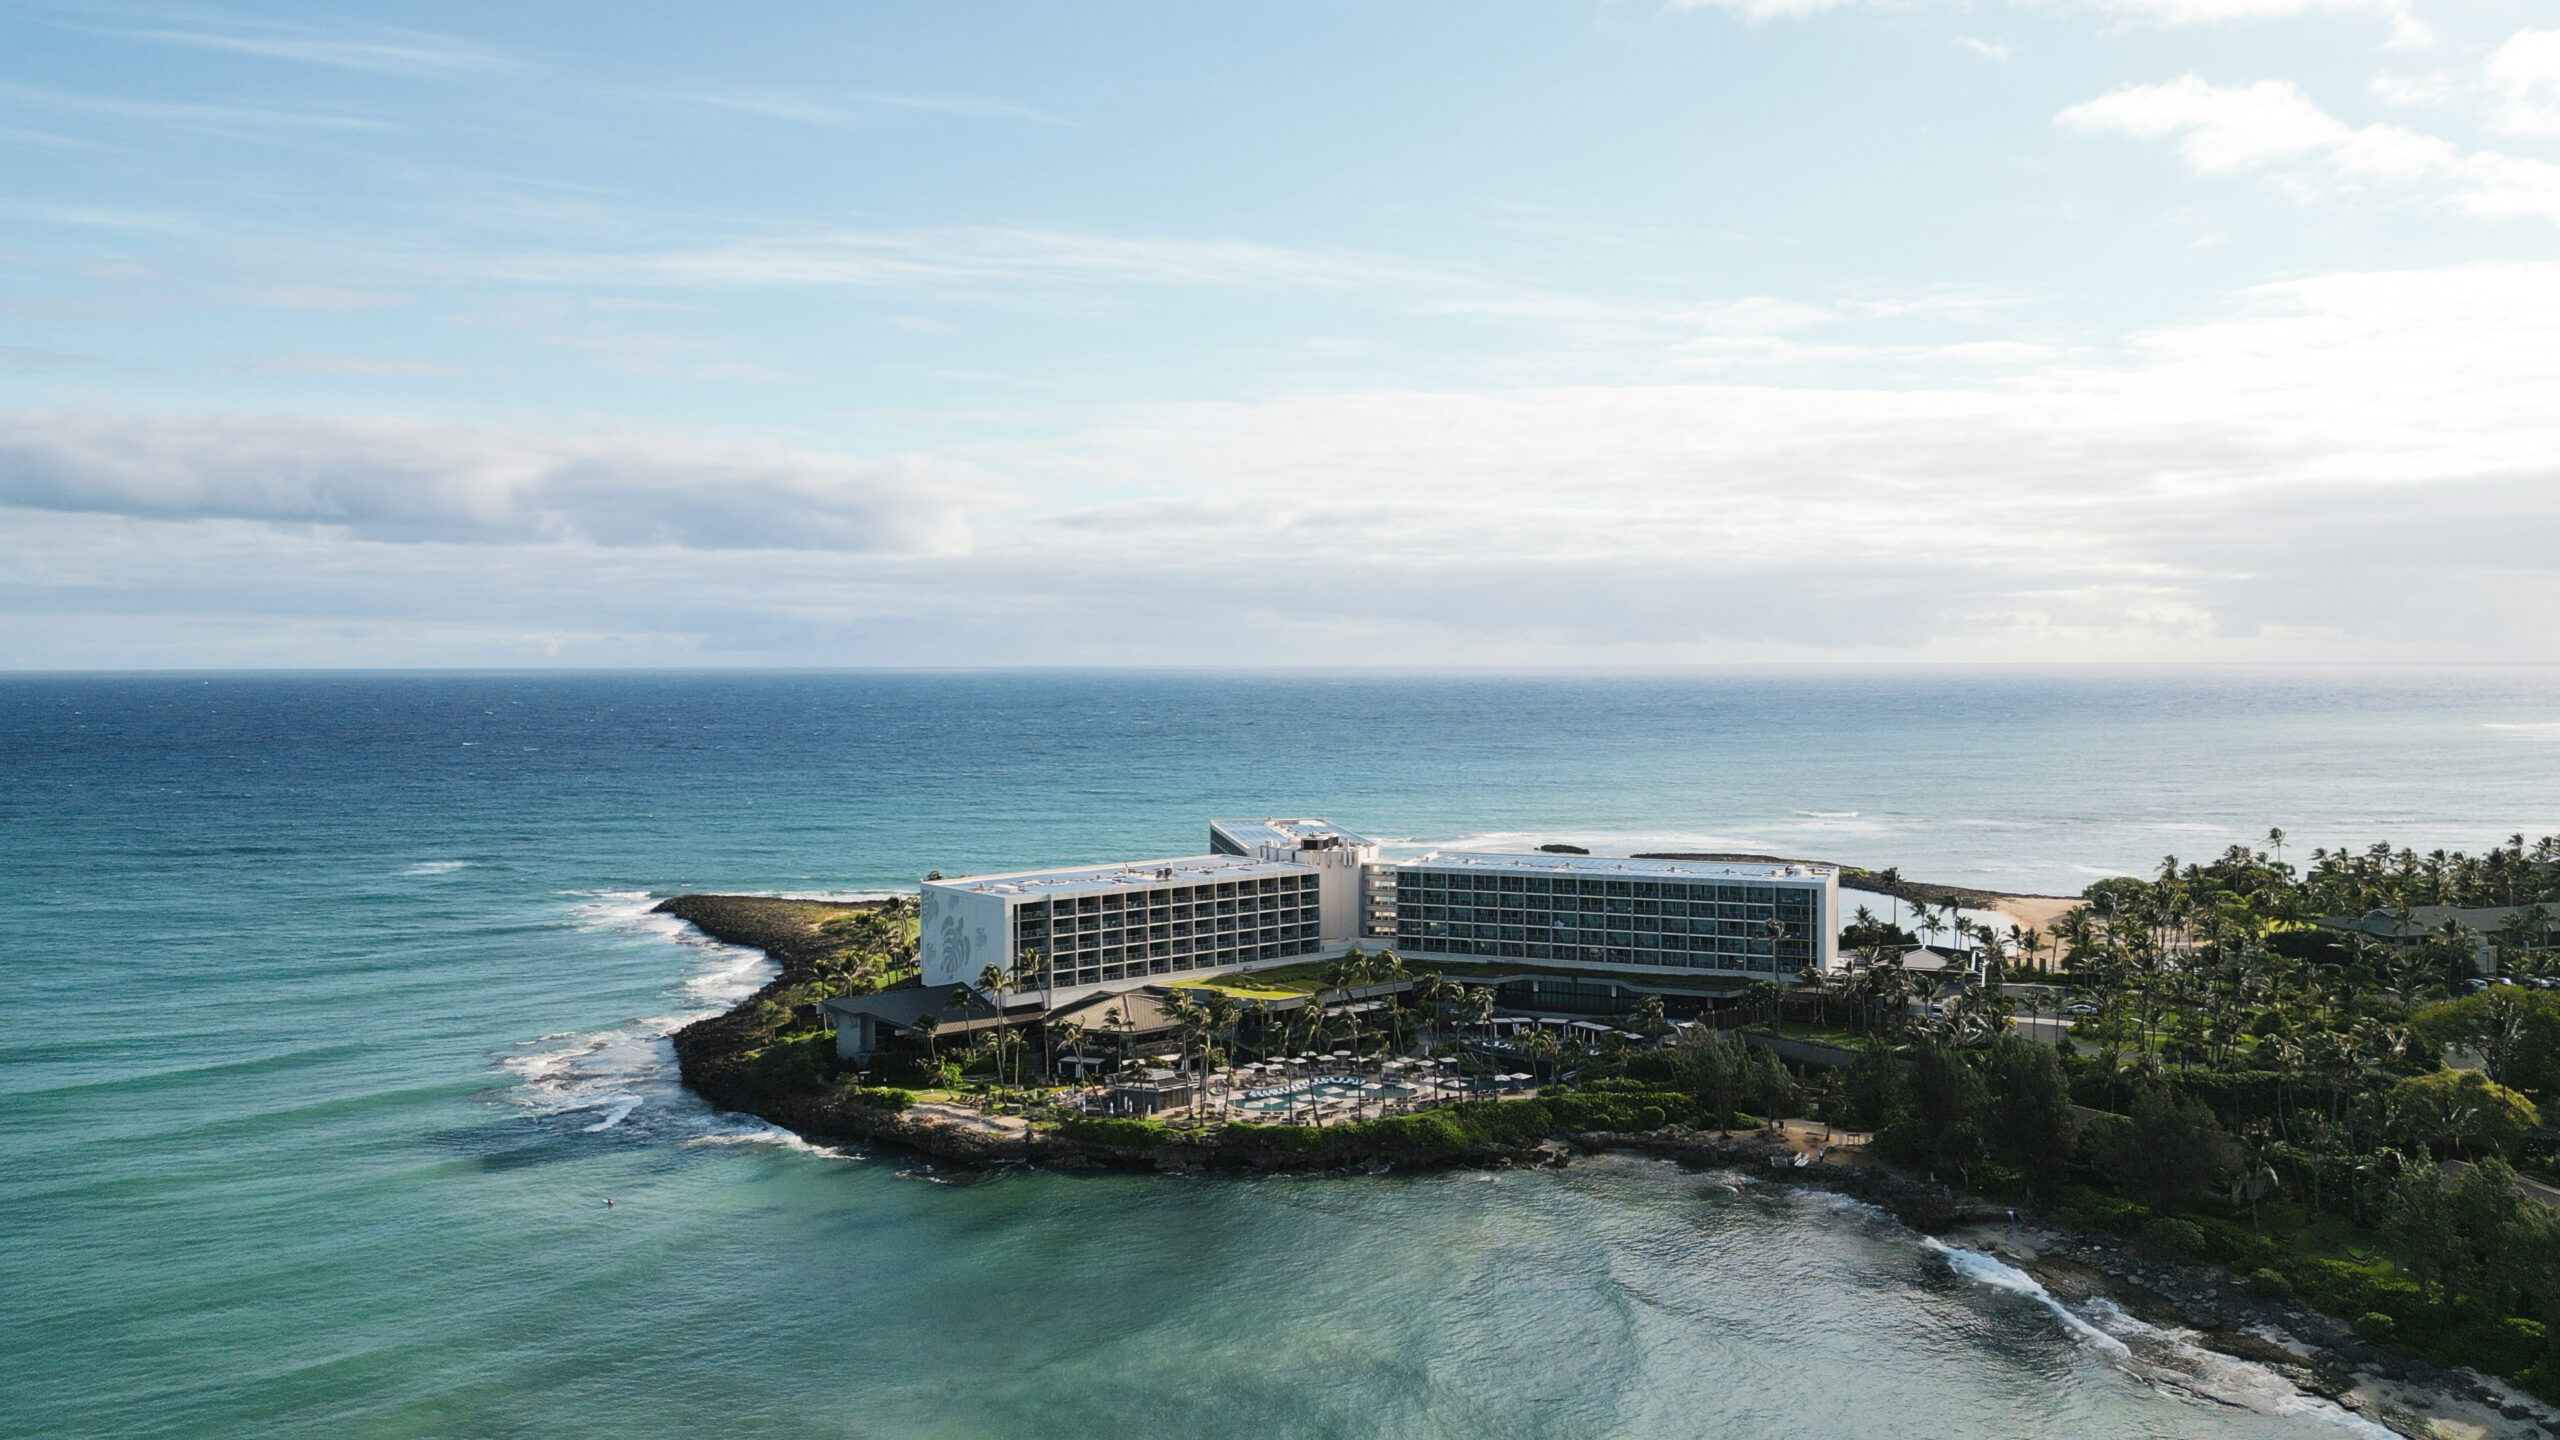 Ariel view of Turtle Bay Resort in Oahu, on an island surrounded by the ocean